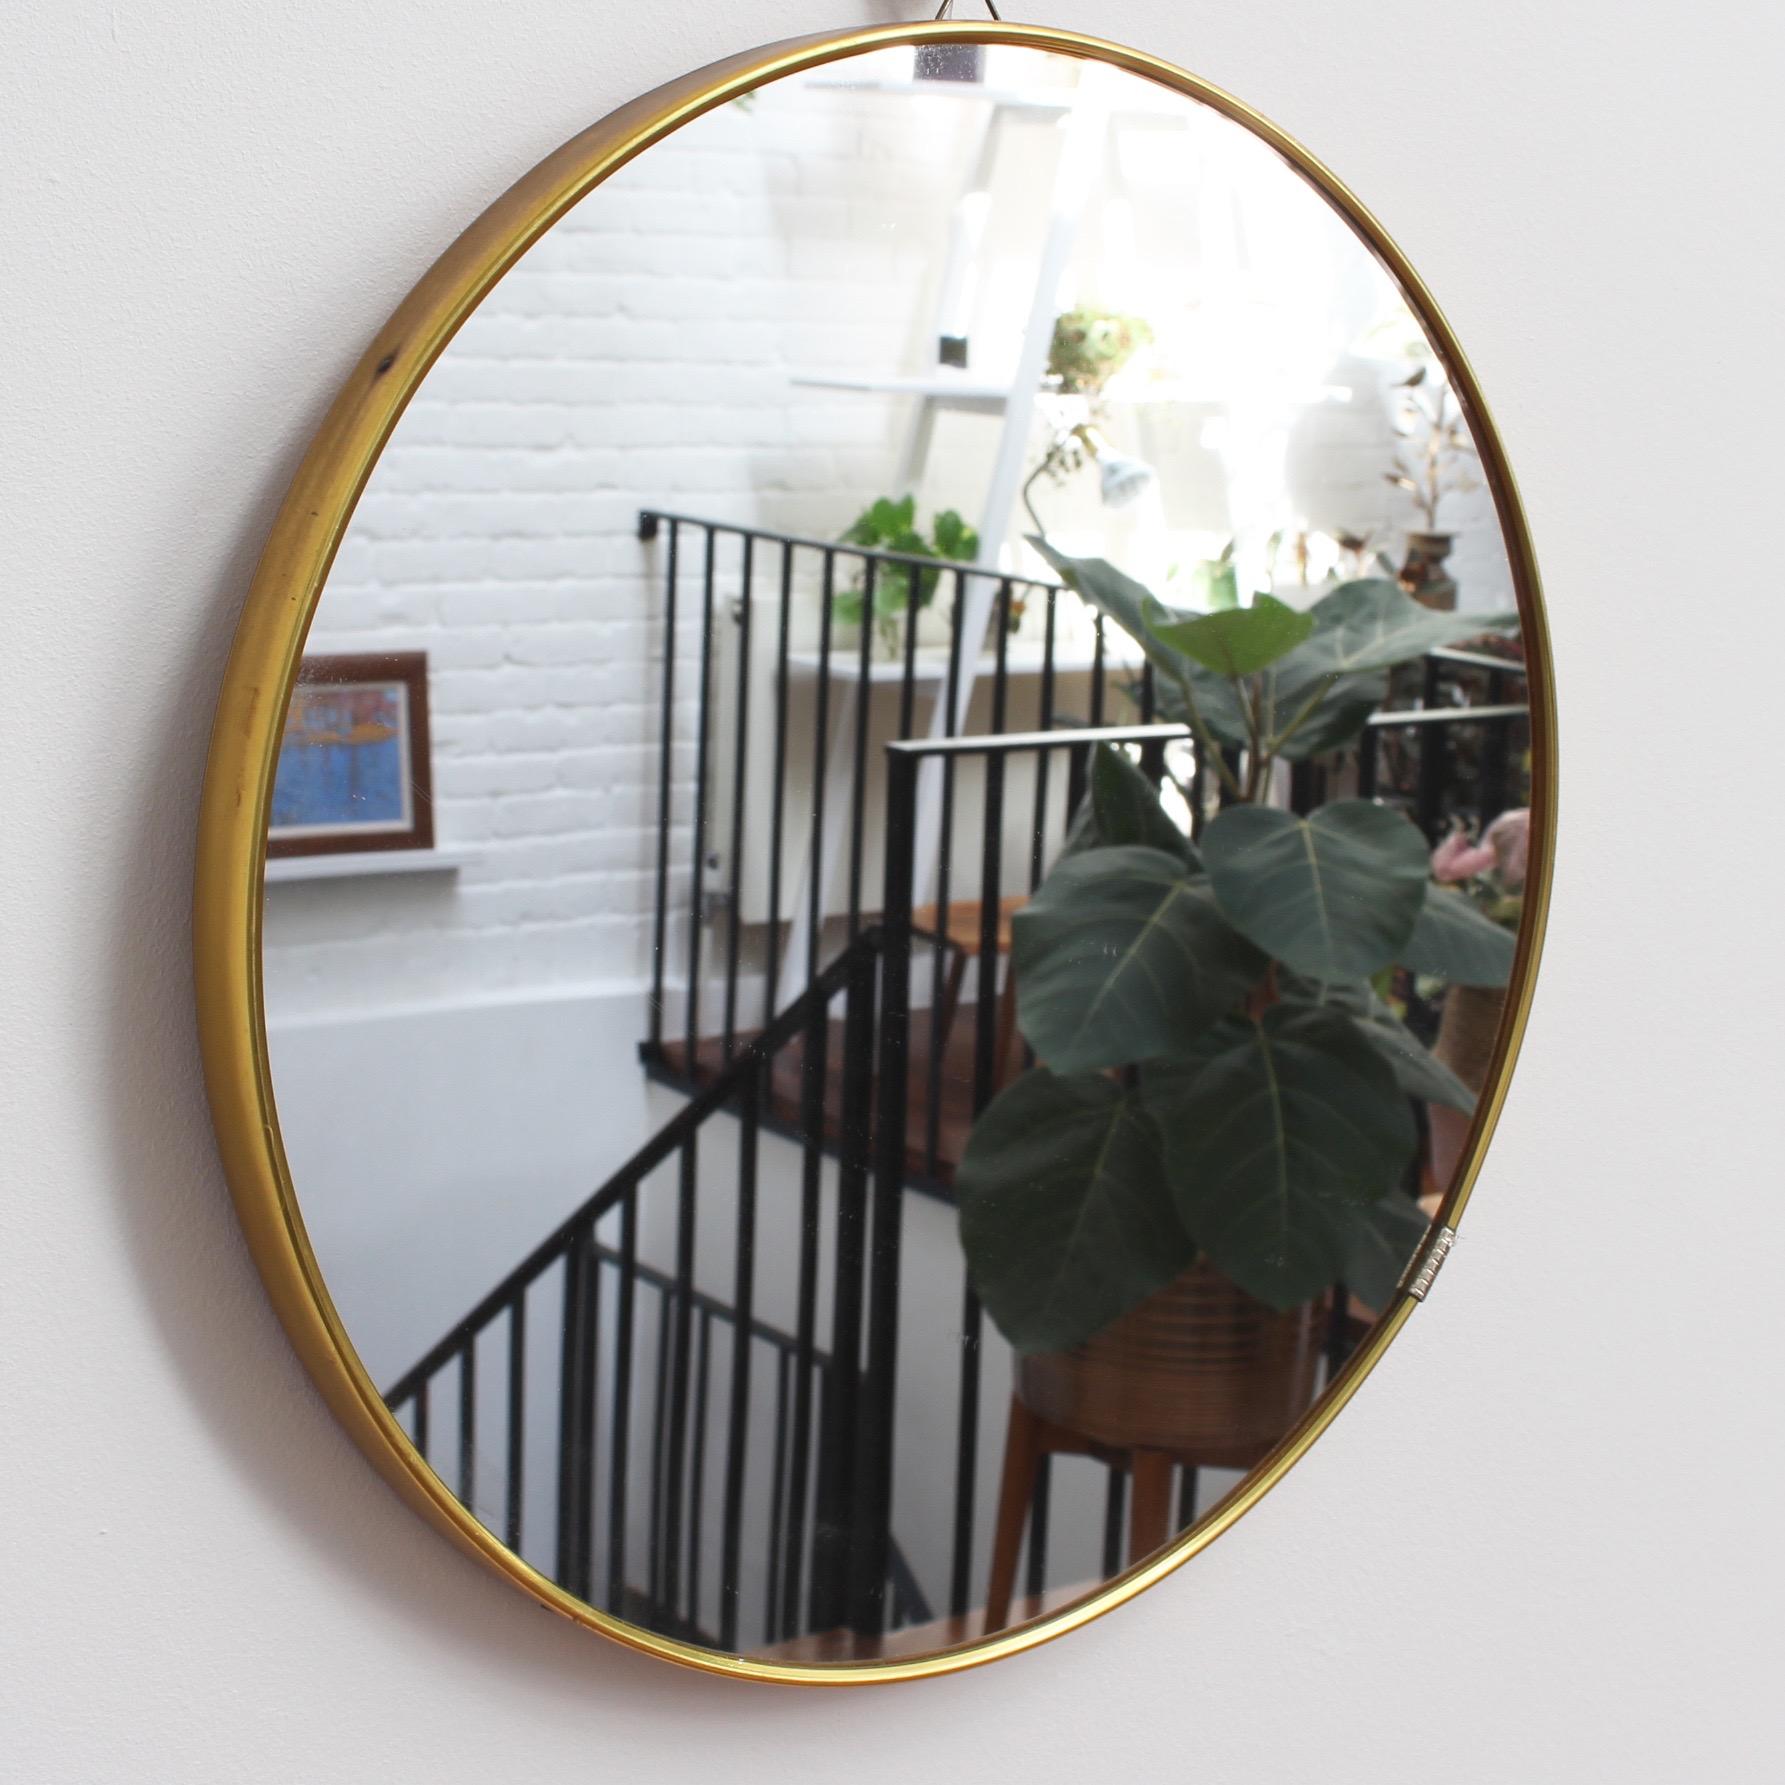 Midcentury Italian wall mirror with brass frame, circa 1950s. The mirror is beautifully circular and so smart with irresistible durability. The effect is elegant and very distinctive in a modern Gio Ponti style. The mirror is in good vintage